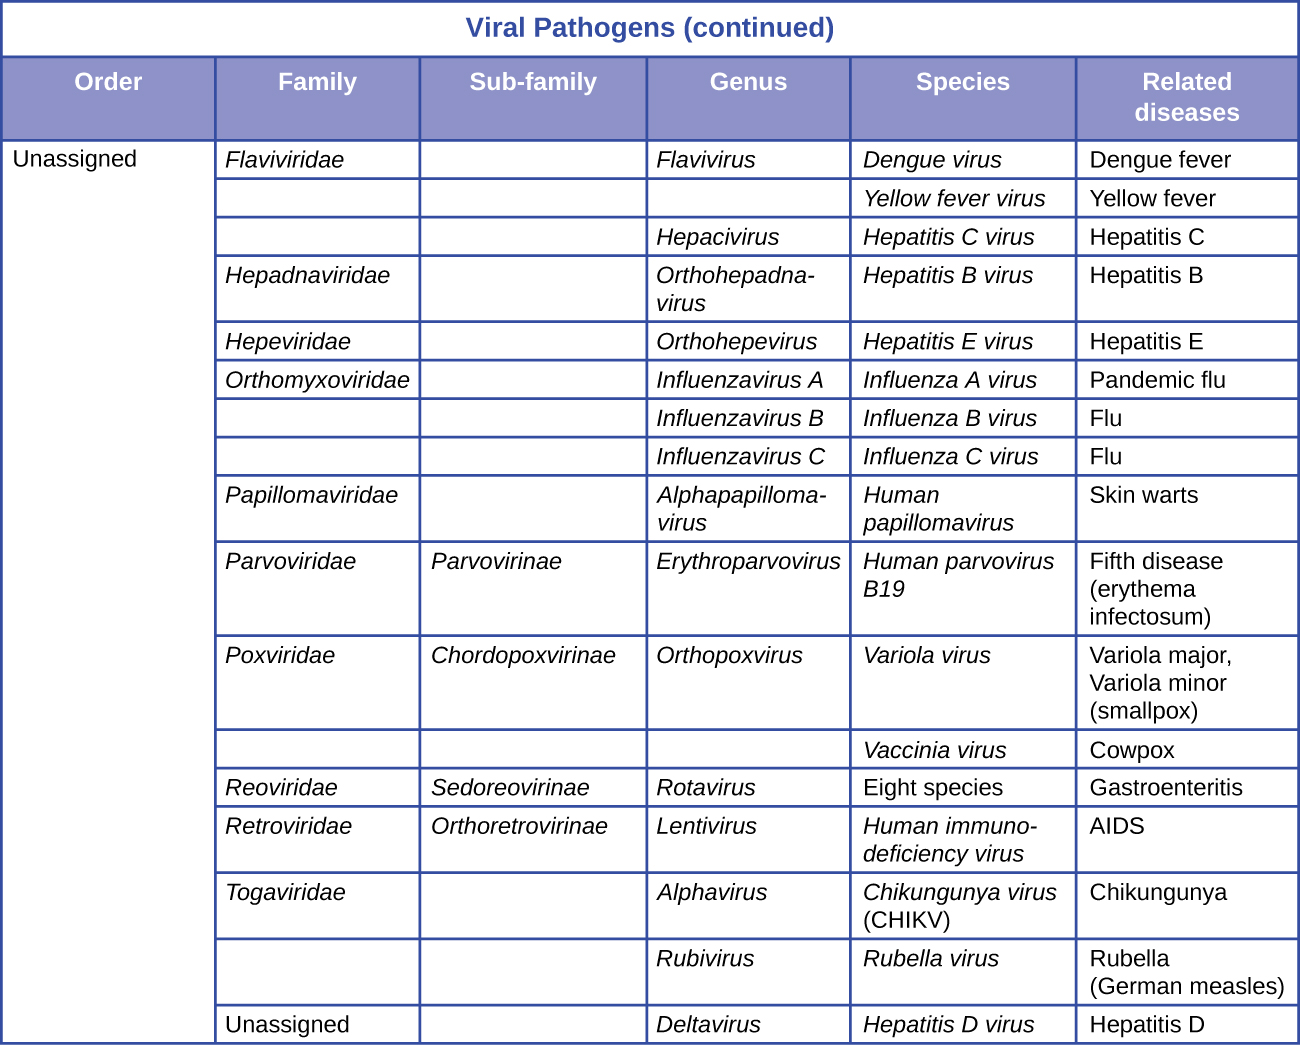 A table titled “Viral Pathogens (continued)” gives information on order, family, subfamily, genus, species, and related diseases.All entries in this table are unassigned in the order category. For the family flaviviriadae, genus flavivirus, species dengue virus, the related disease is dengue fever. For the family flaviviriadae, genus flavivirus, species Yellow fever virus, the related disease is yellow fever. In the family flaviviriadae, genus hepacivirus, species hepatitis c virus, the related disease is hepatitis C. For the family hepadnaviridae, genus orthohepadnavirus, species hepatitis B virus, the related disease is hepatitis B. For the family Hepeviridae, genus orthohepevirus, species hepatitis E virus, the related disease is hepatitis E. For the family orthomyxoviridae, genus influenzavirus A, species influenza virus A, the related disease is pandemic flu. For the family orthomyxoviridae, genus influenzavirus B, species influenza virus B, the related disease is Flu. For the family orthomyxoviridae, genus influenzavirus C, species influenza virus C, the related disease is Flu. For the family papillomaviridae, genus alphapapillomavirus, species human papillomavirus, the related disease is skin warts. For the family parvoviridae, subfamily parvovirinae, genus erythroparvovirus, species human parvovirus B 19, the related disease is fifth disease (erythema infectosum). For the family poxviridae, subfamily chordopoxvirinae, genus orthopoxvirus, species variola virus, the related diseases are variola major, variola minor (smallpox). For the family poxviridae, subfamily chordopoxvirinae, genus orthopoxvirus, species vaccinia virus, the related disease is cowpox. For the family reoviridae, subfamily sedoreovirinae, genus rotavirus, species eight species, the related disease is gastroenteritis. For the family retroviridae, subfamily orthoretrovirinae, genus lentivirus, species human immunodeficiency virus, the related disease is AIDS. For the family togaviridae, genus alphavirus, species chikungunya virus (CHIKV), the related disease is Chikungunya. For the family togaviridae, genus rubivirus, species rubella virus, the related disease is Rubella (German measles). For an unassigned order, genus deltavirus, species hepatitis D virus, the related disease is hepatitis D.